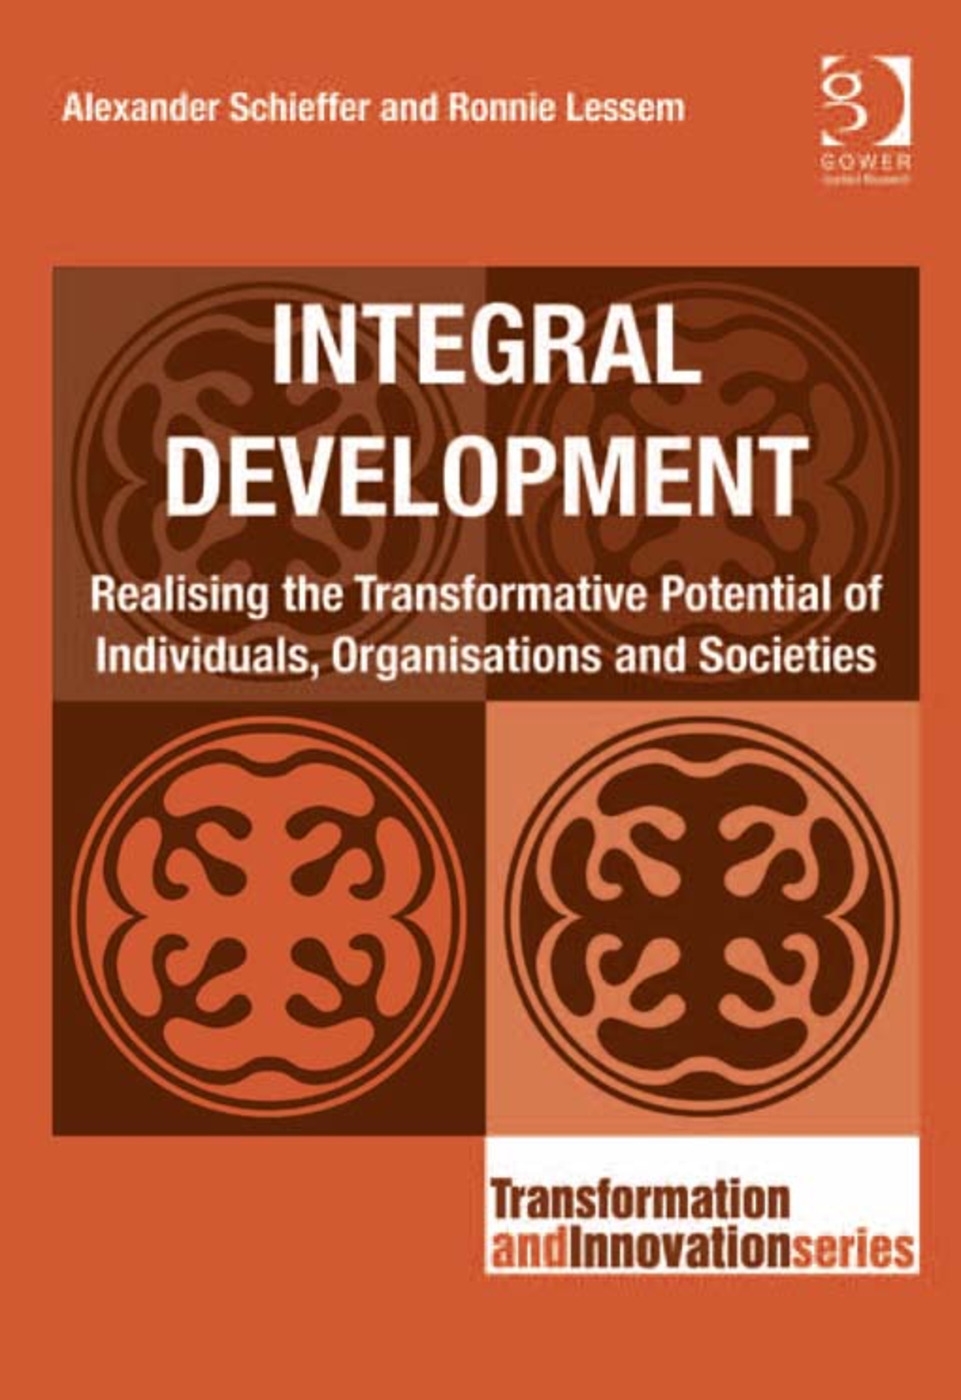 Integral Development: Realising the Transformative Potential of Individuals, Organisations and Societies. by Alexander Schieffer and Ronnie